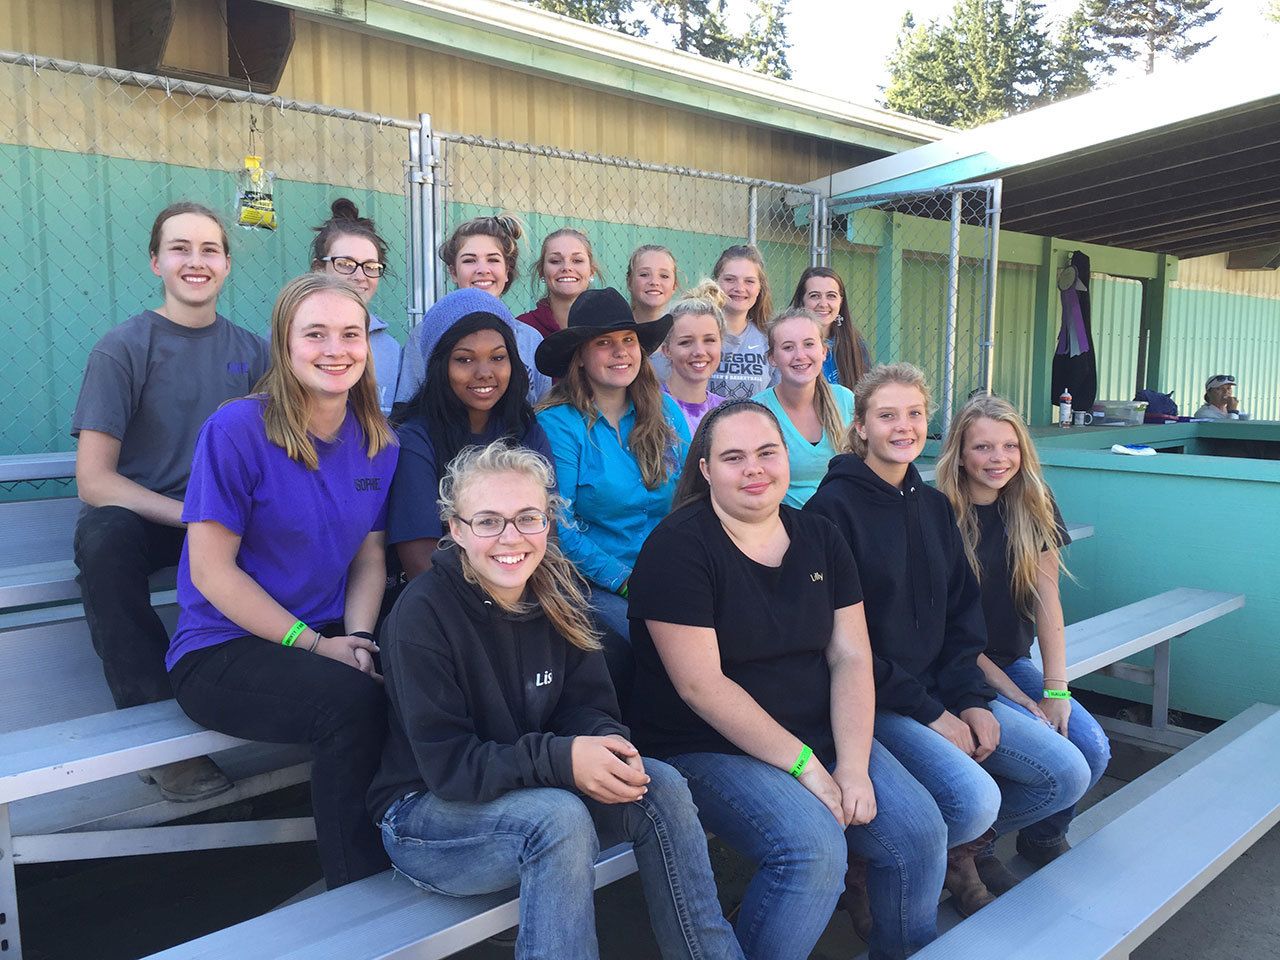 Several members of 4-H performed well enough at last weekend’s Clallam County Fair to qualify for the Washington State Fair next month in Puyallup. Shown here, in the back row from left, are Katie Marchant, Haylie Newton, Natalie Blankenship, Emily Gear, Sierra Ballou, Madison Green and Cassidy Hodgin; middle row from left, Sophie Marchant, Ebony Billings, Madison Ballou, Emily Menshew and Kaylie Graf; and front row from left, Lisi Hanson, Lillian Batton, Abigail Hjelmeseth and Cassie Roark.